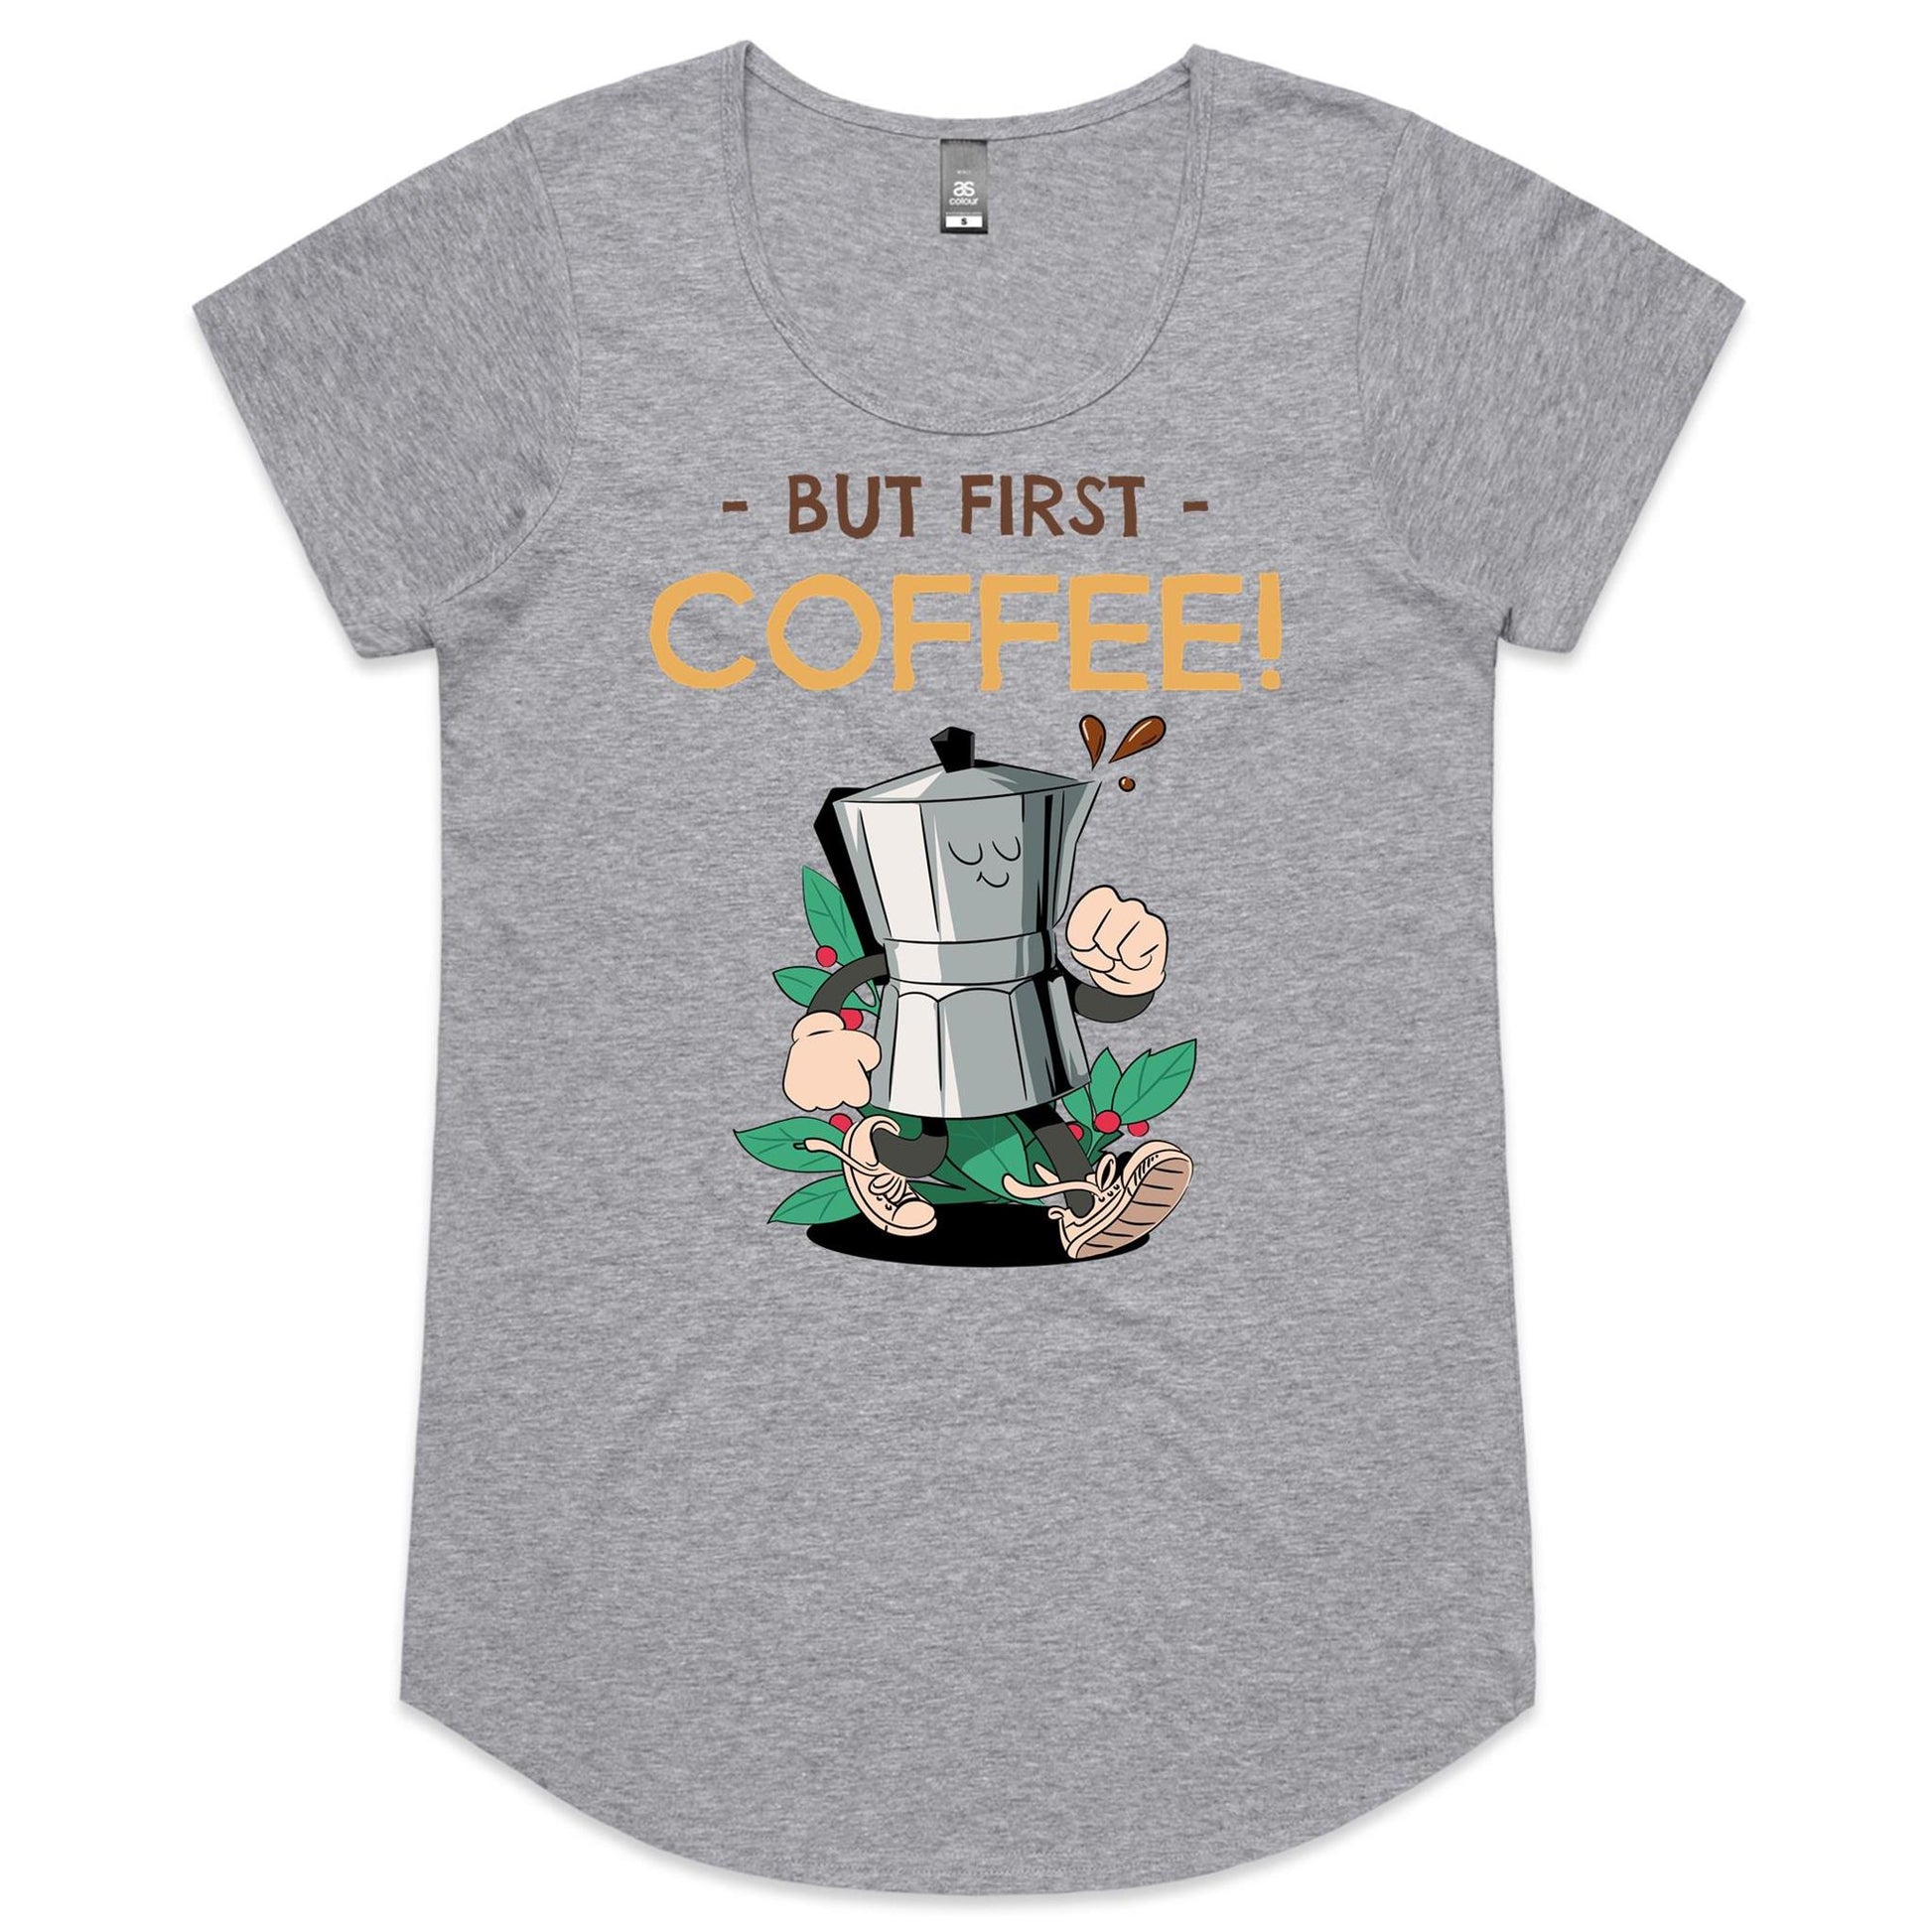 But First Coffee - Womens Scoop Neck T-Shirt Grey Marle Womens Scoop Neck T-shirt Coffee Retro